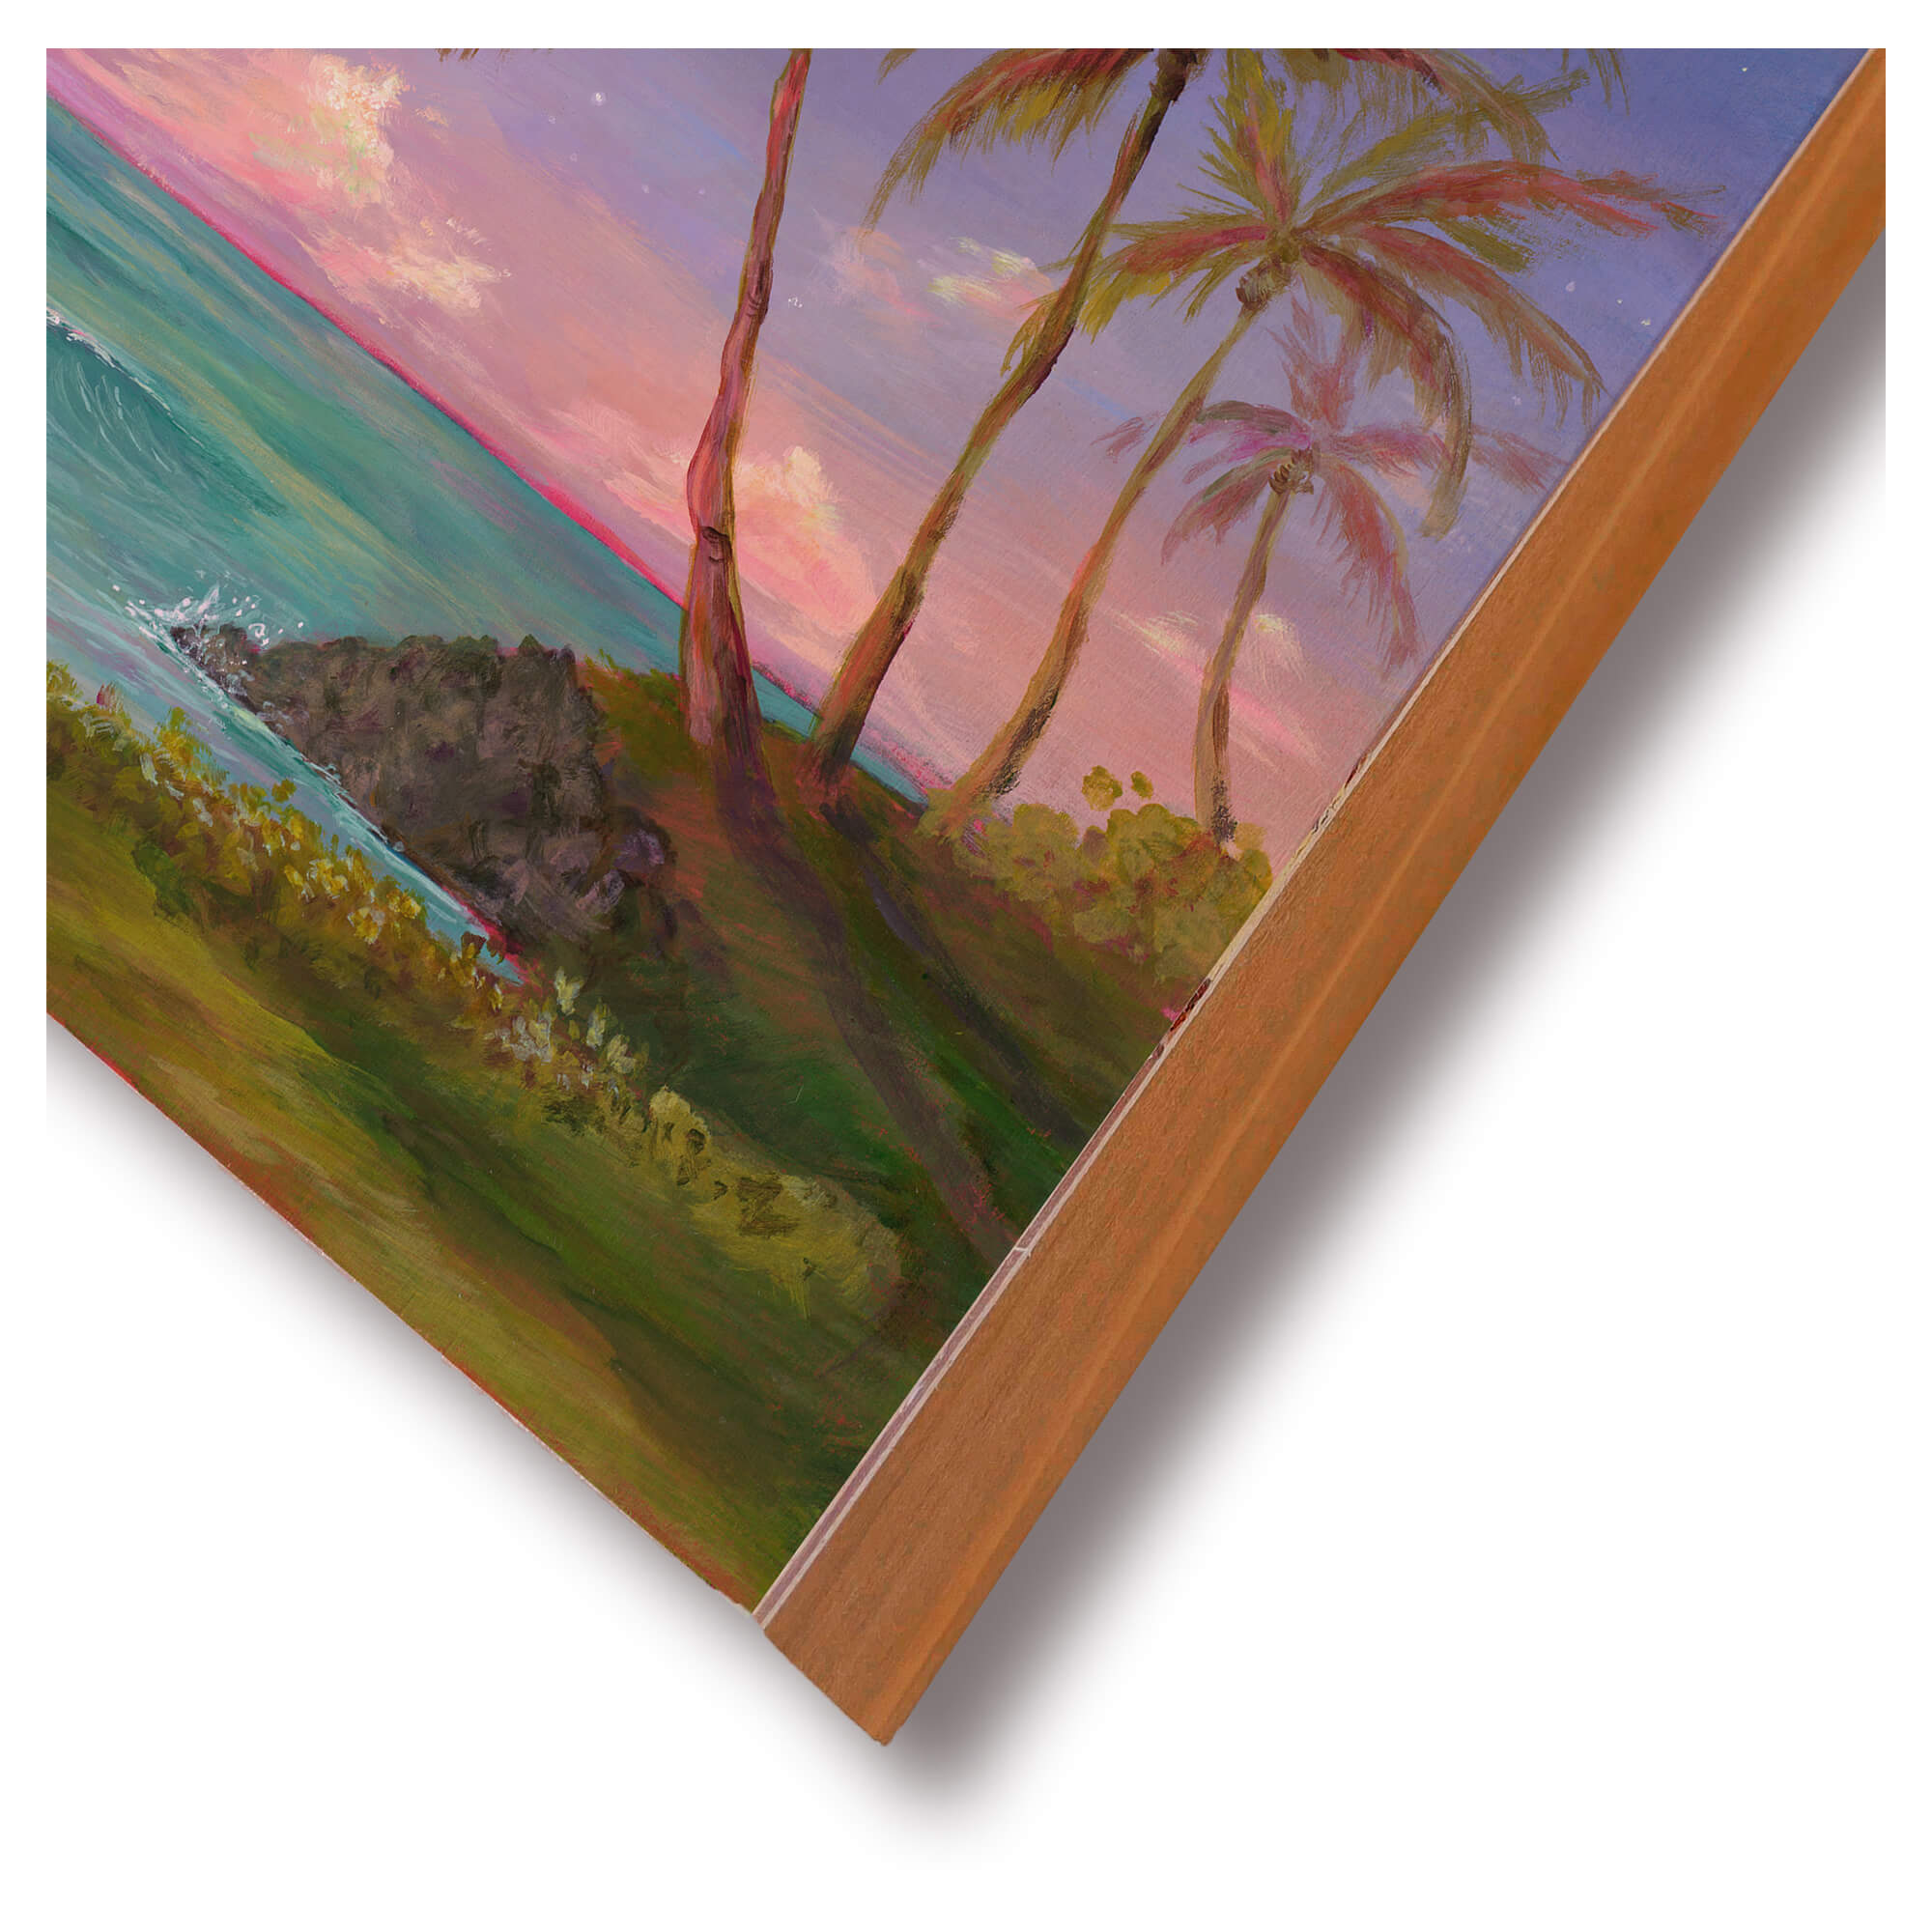 Coconut trees on a cliff by Hawaii artist Lindsay Wilkins